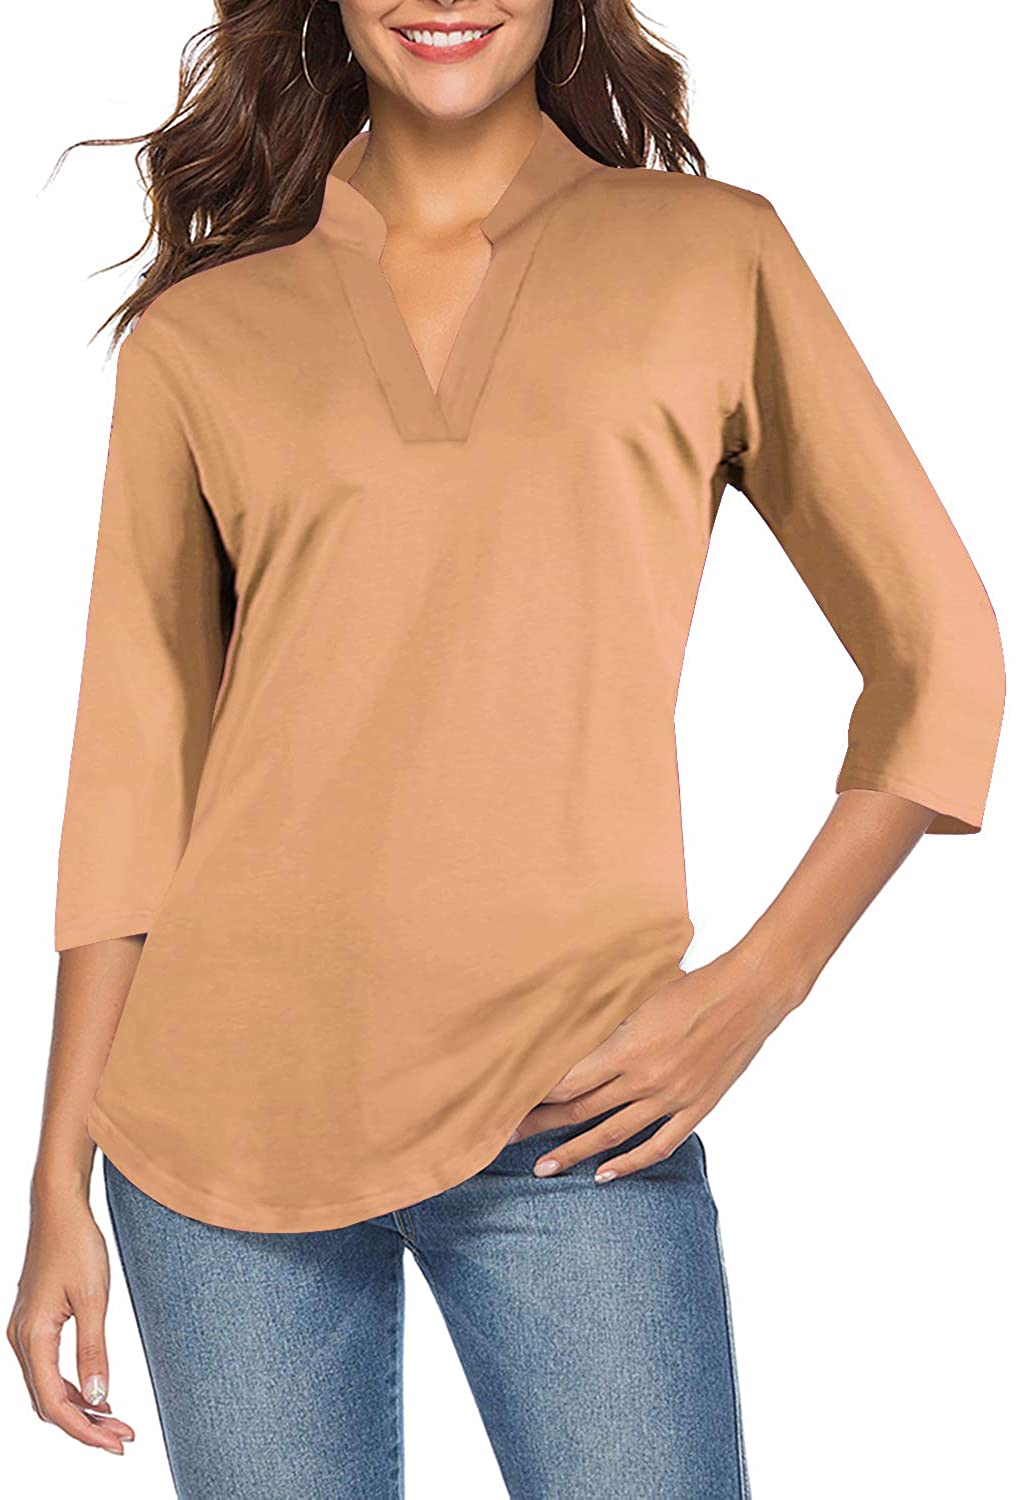 CEASIKERY Women's 3/4 Sleeve V Neck Tops Casual Tunic Blouse Loose Shirt at   Women's Clothing store